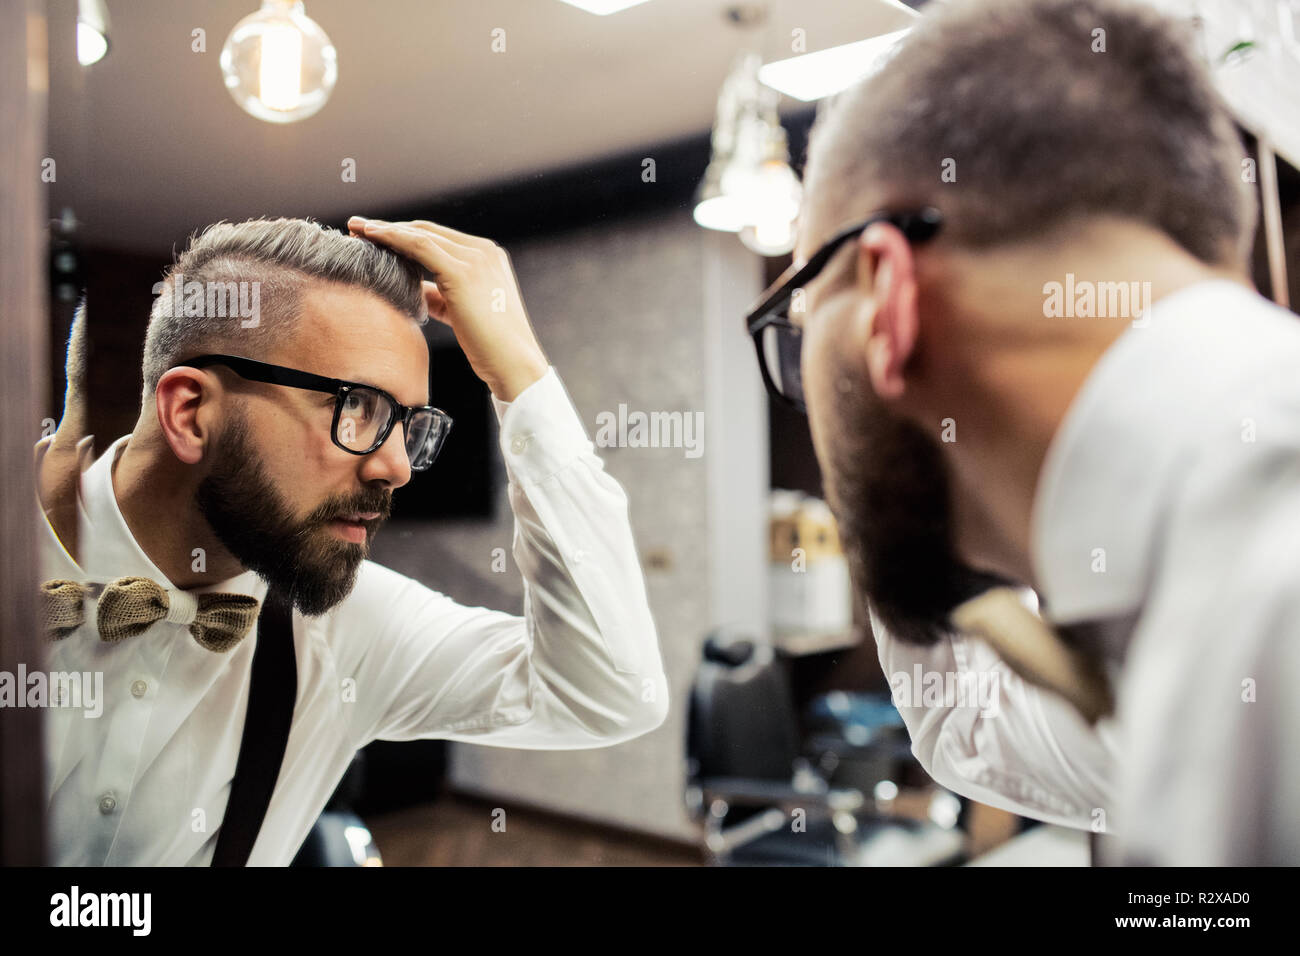 Hipster man client with glasses looking in the mirror in barber shop. Stock Photo